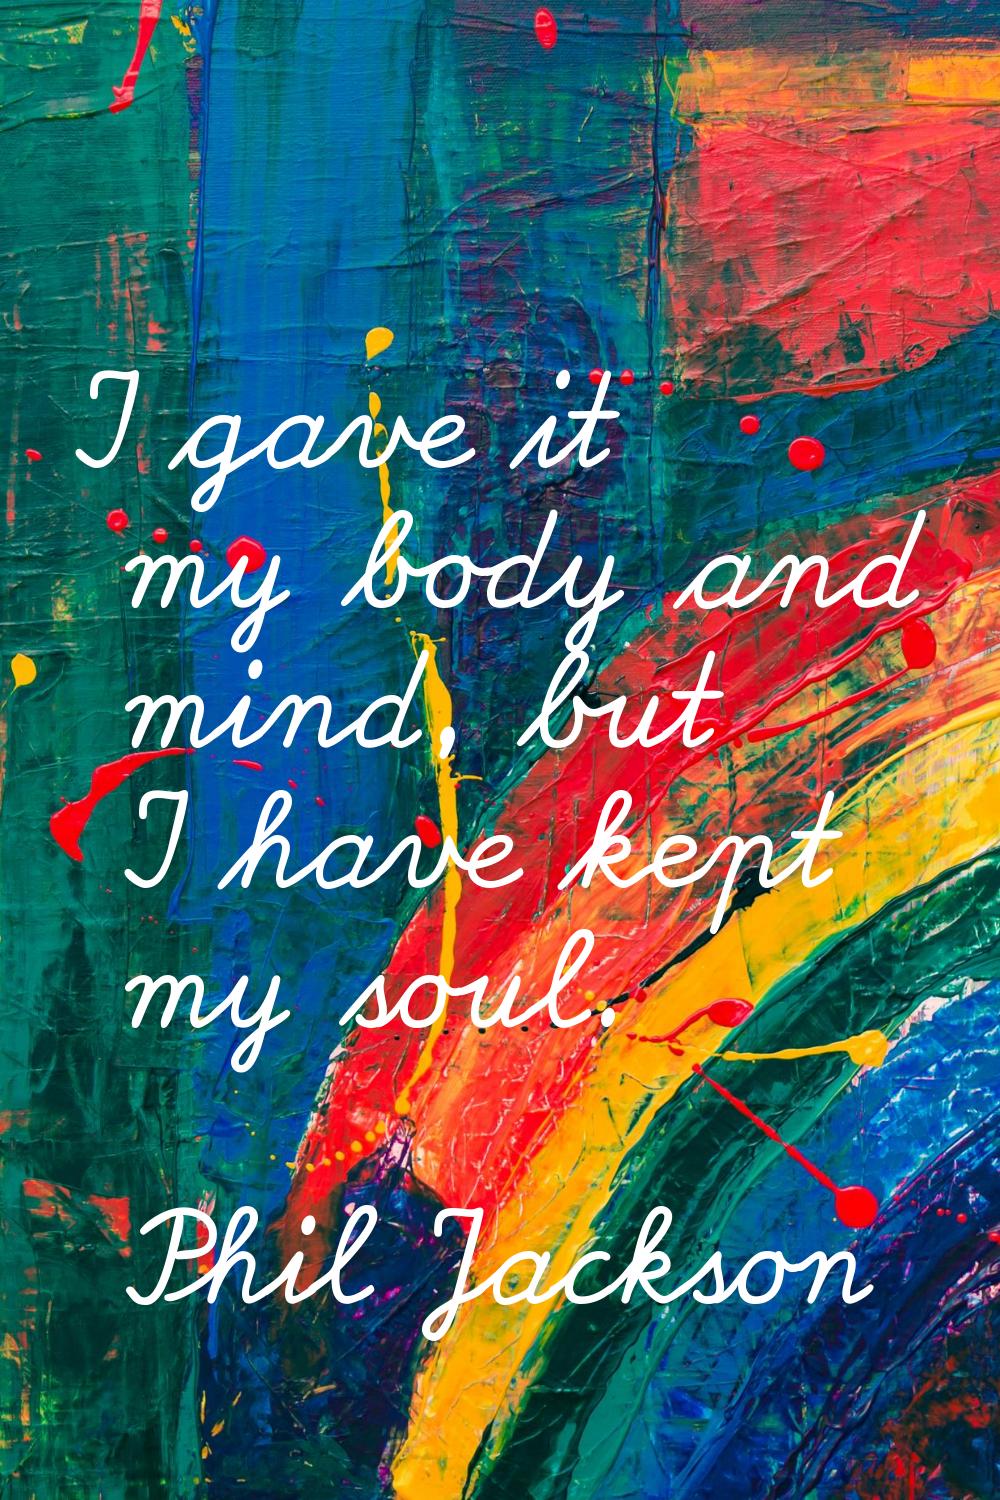 I gave it my body and mind, but I have kept my soul.